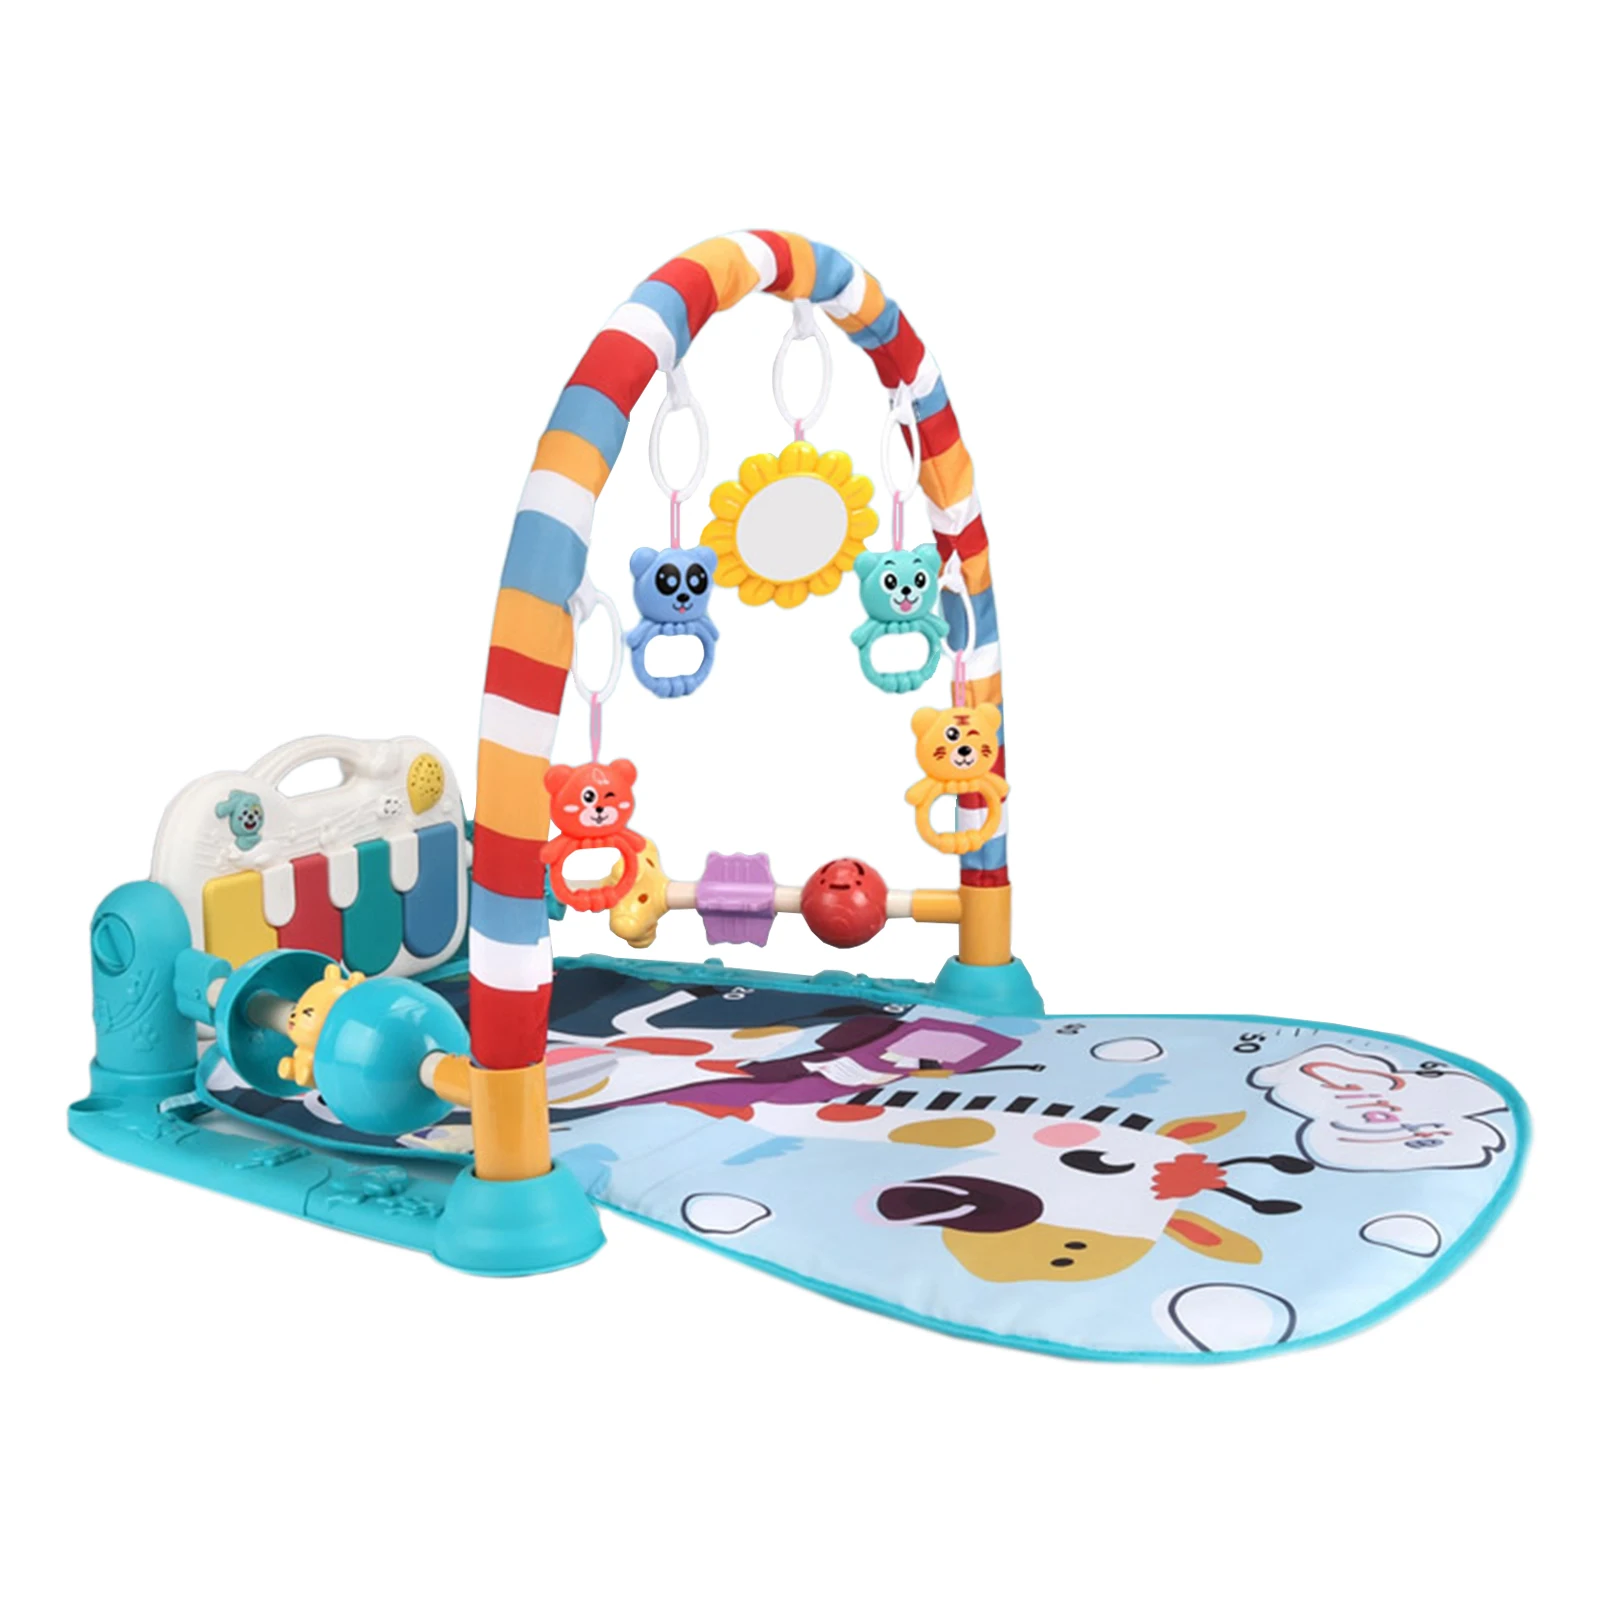 Baby Gym Play Mat Early Developmental Toys Music Play Mat Activity Gym for Babies Toddlers 6-12 Months 0-6 Months Xmas Gifts